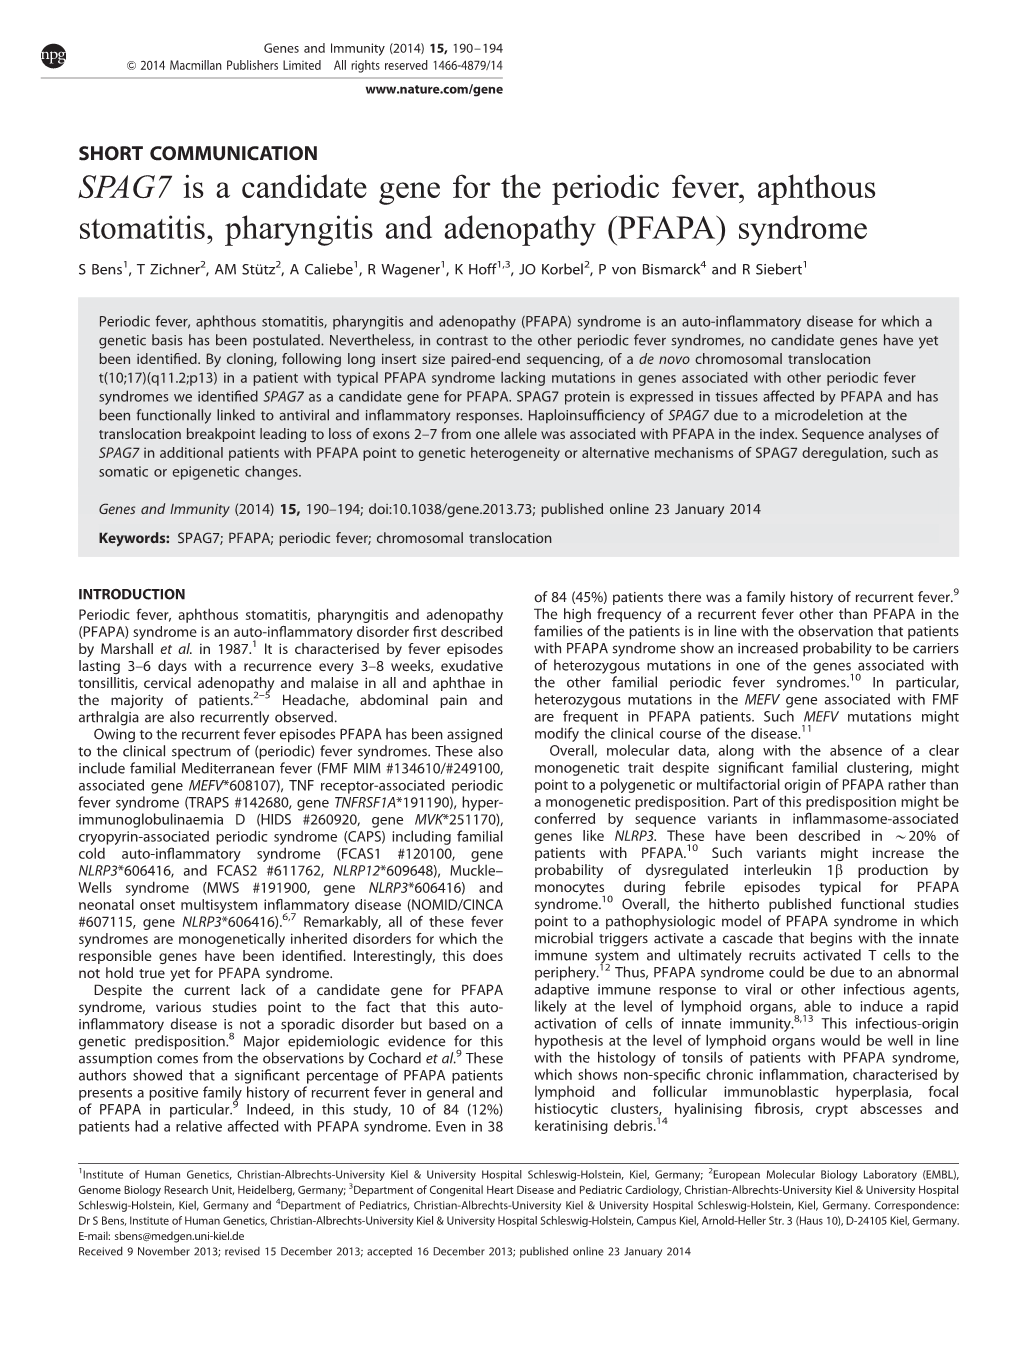 SPAG7 Is a Candidate Gene for the Periodic Fever, Aphthous Stomatitis, Pharyngitis and Adenopathy (PFAPA) Syndrome